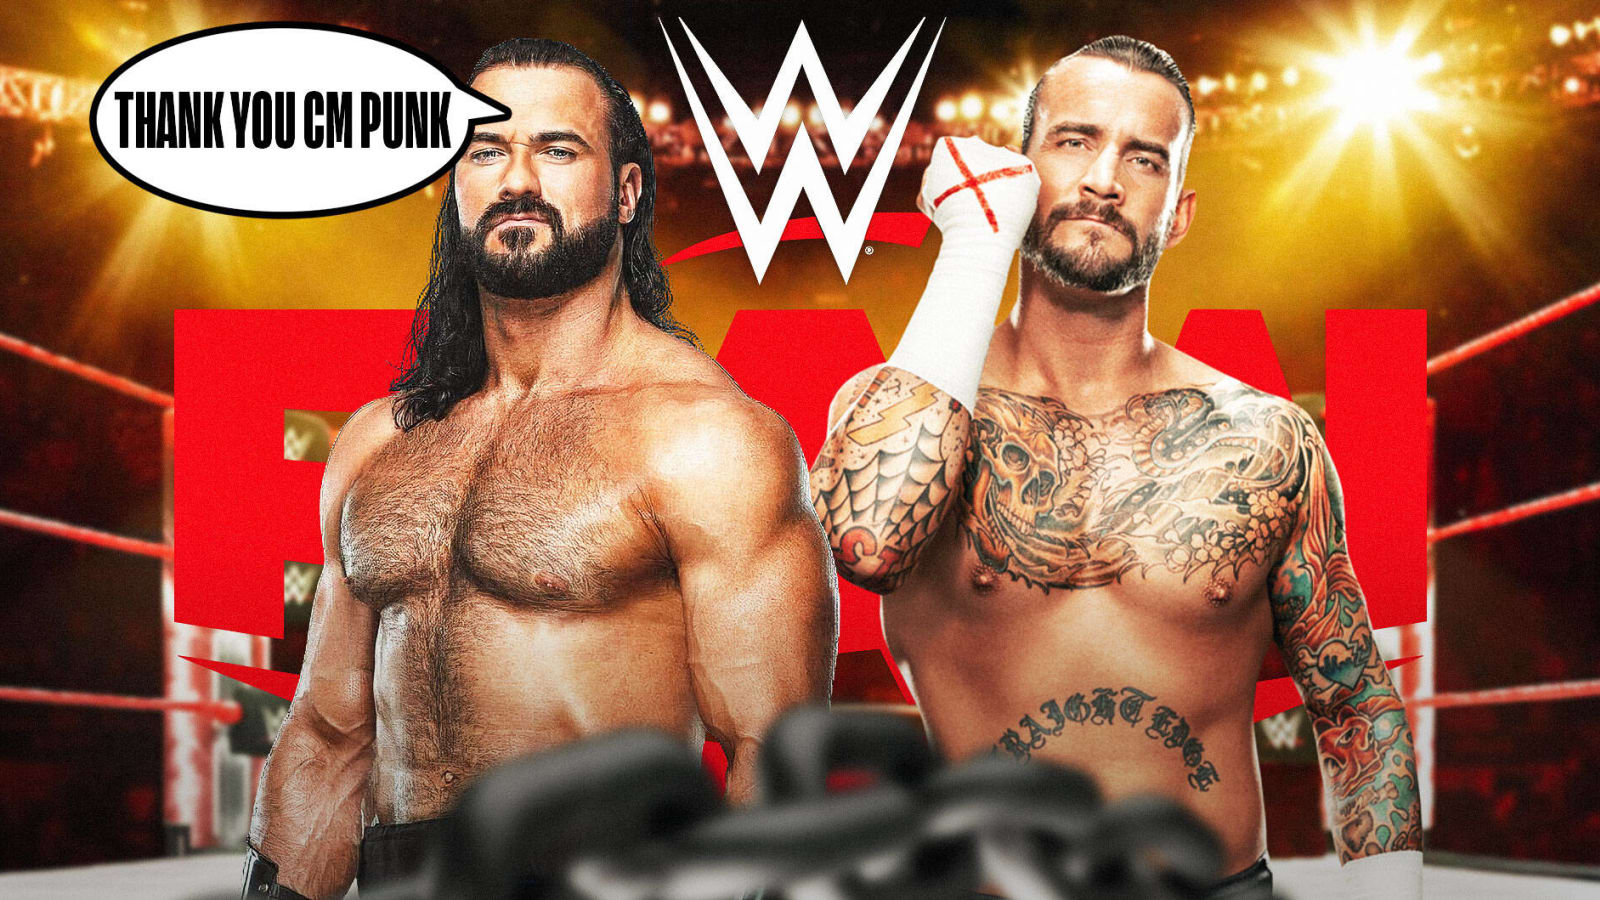 Drew McIntyre actually thanks CM Punk for bringing out the best of him